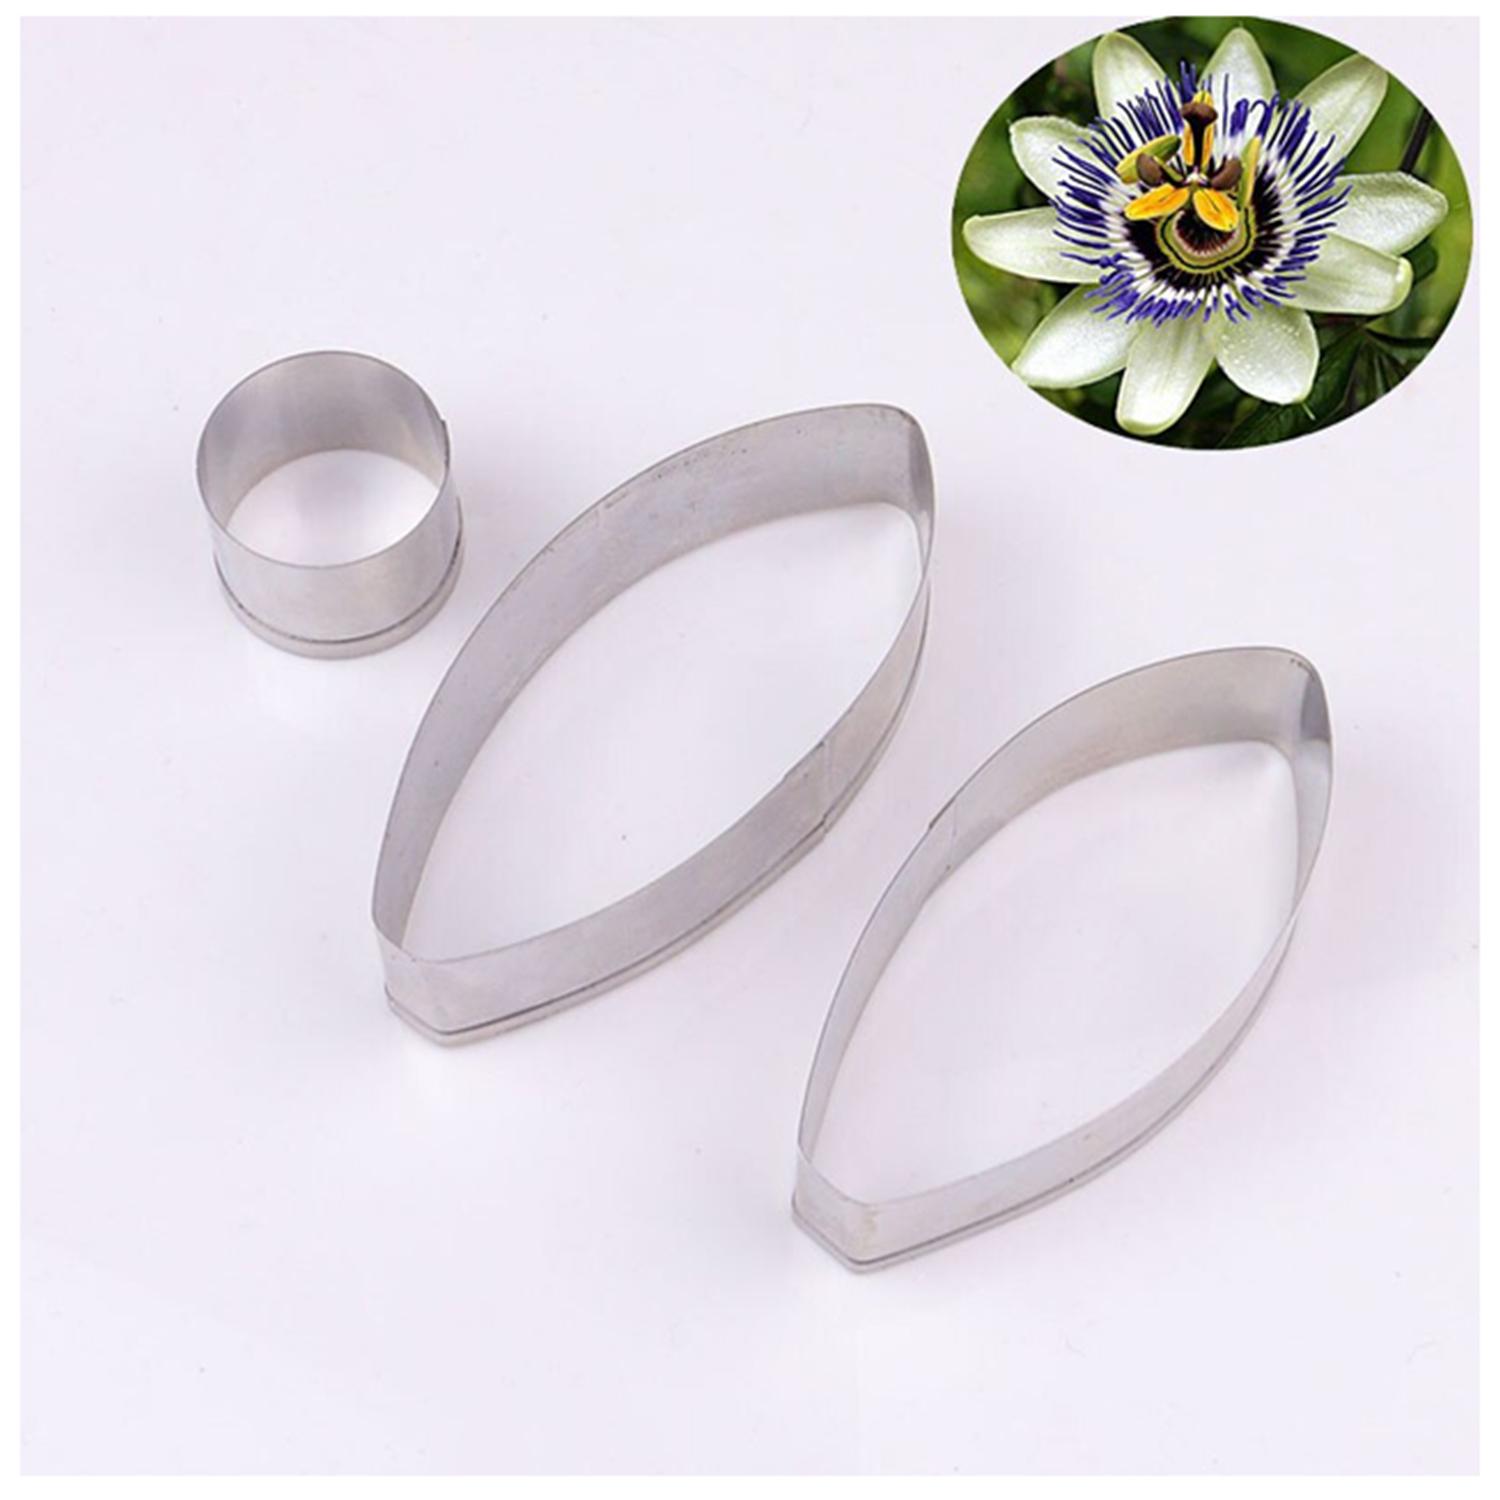 A601 3PCS STAINLESS STEEL PASSION FLOWER PETAL CUTTER